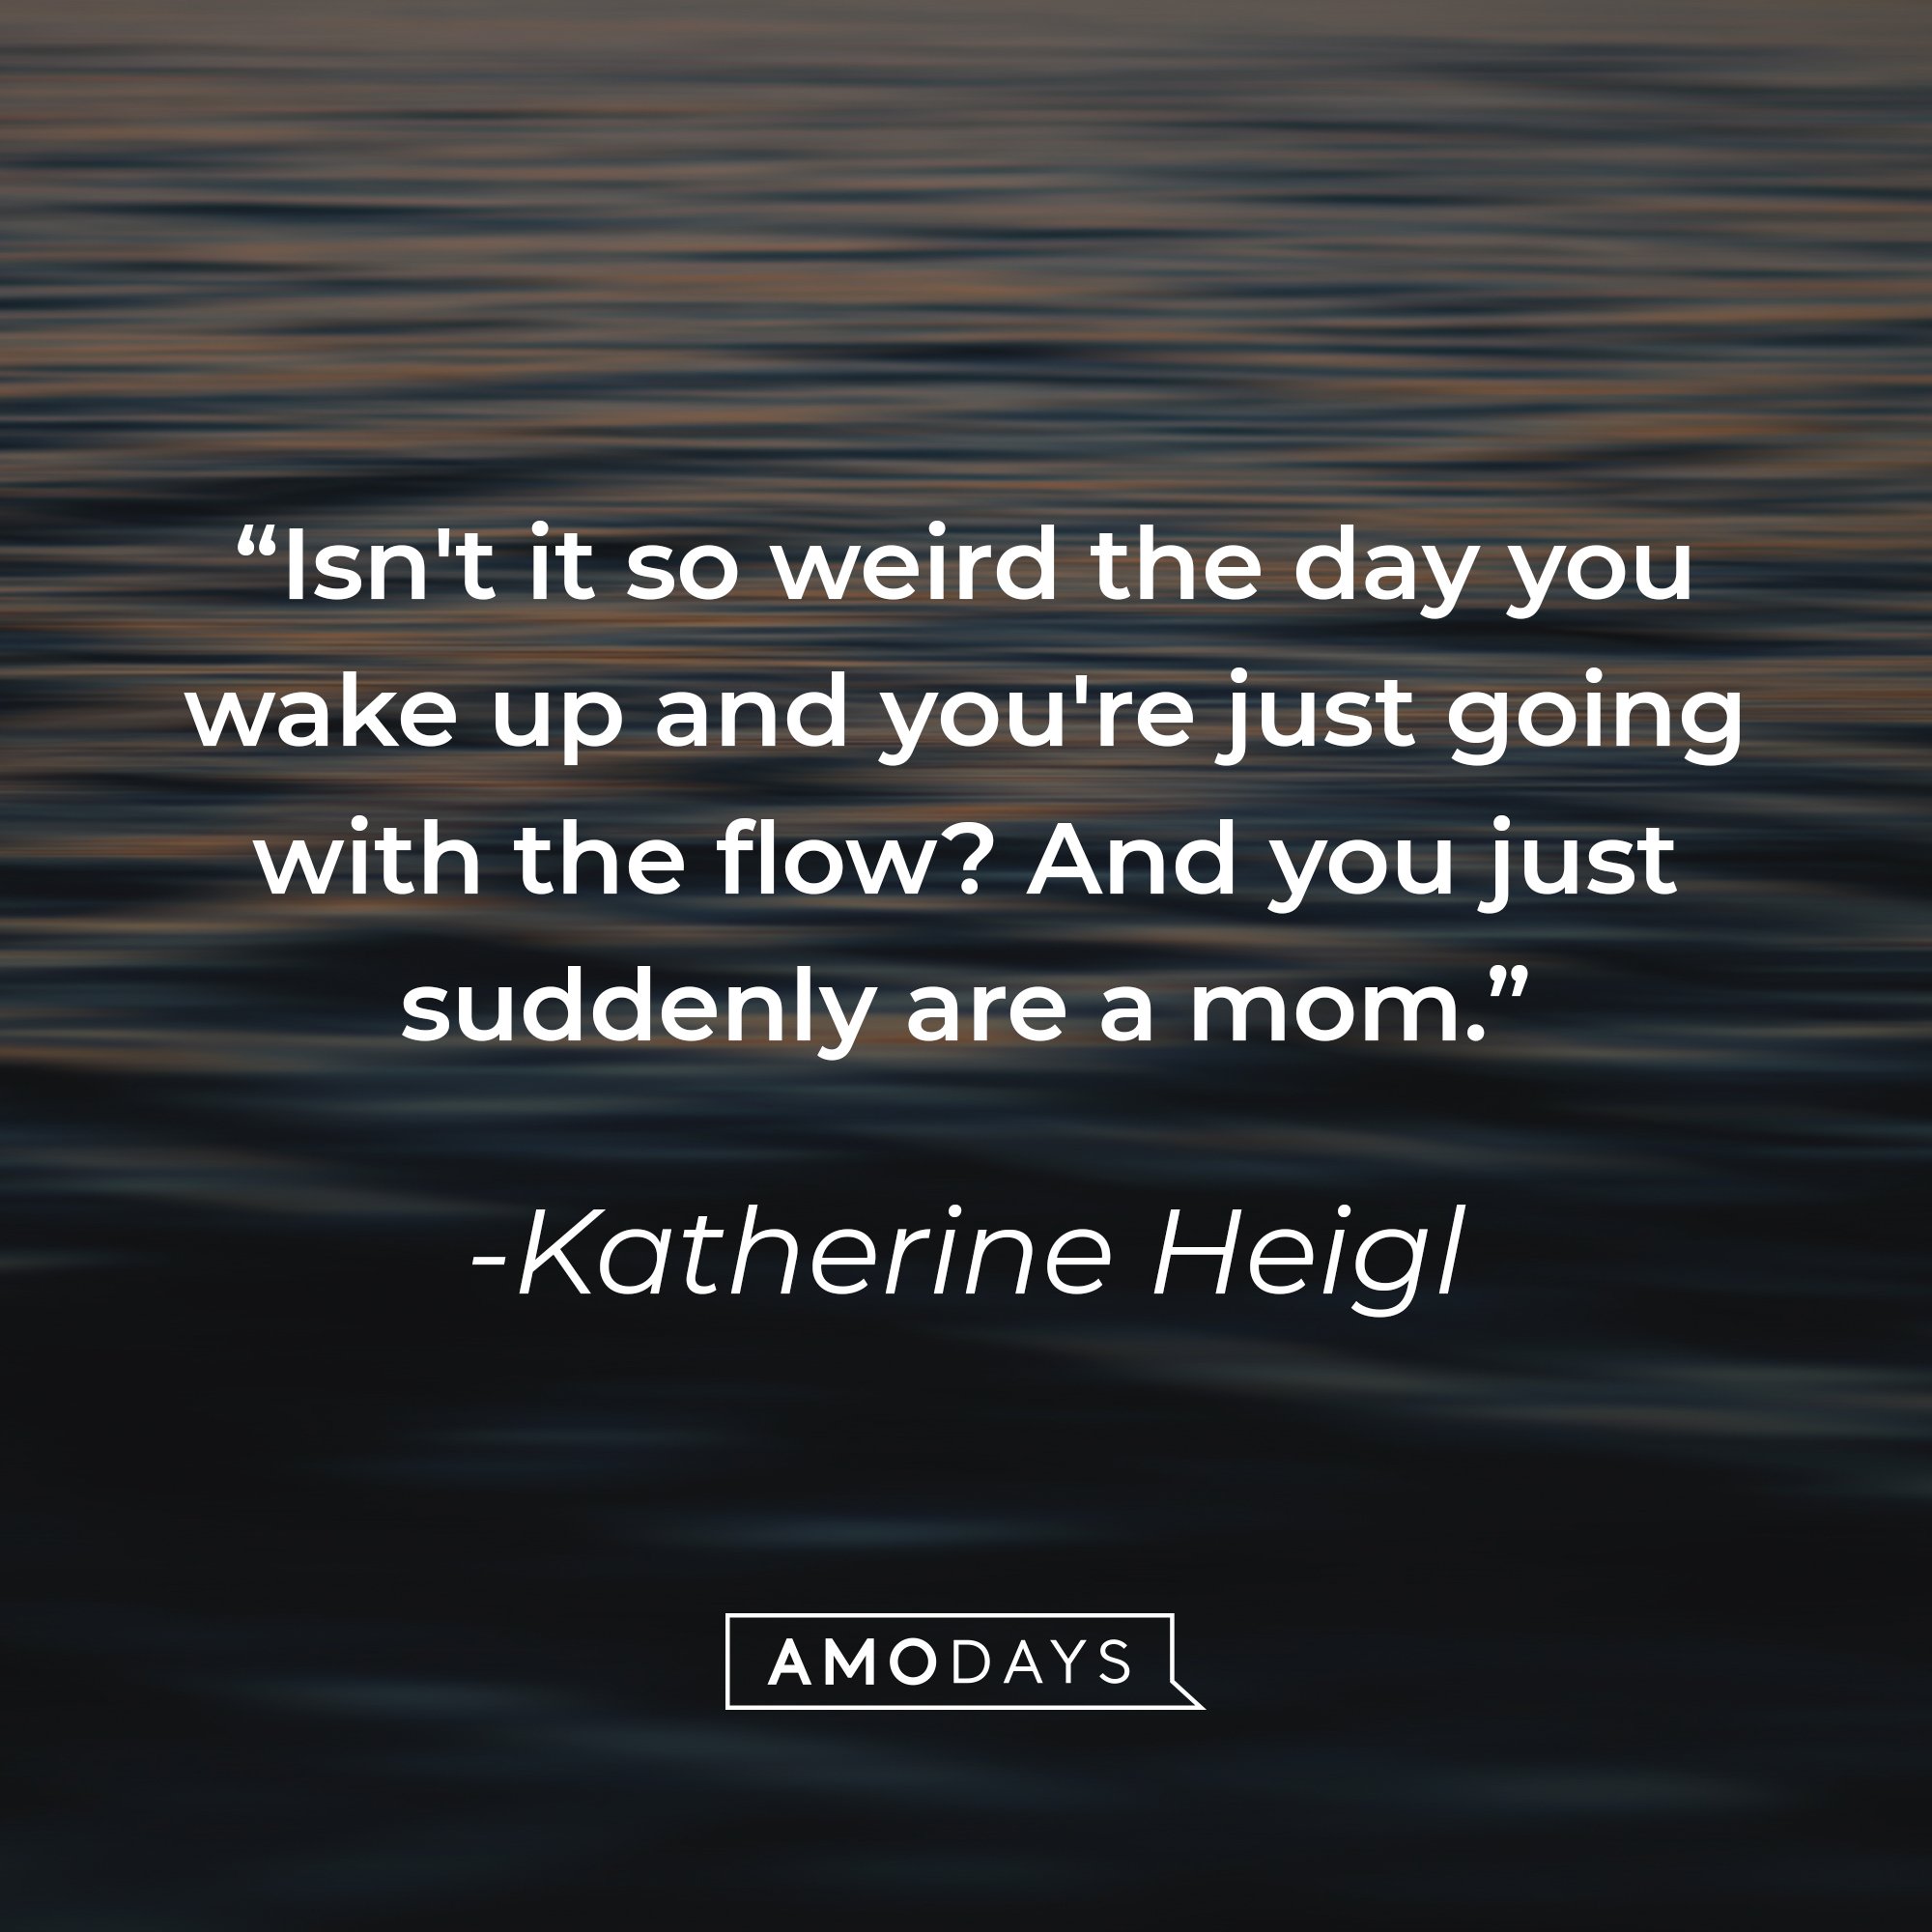 Katherine Heigl's quote: "Isn't it so weird the day you wake up and you're just going with the flow? And you just suddenly are a mom." | Image: AmoDays